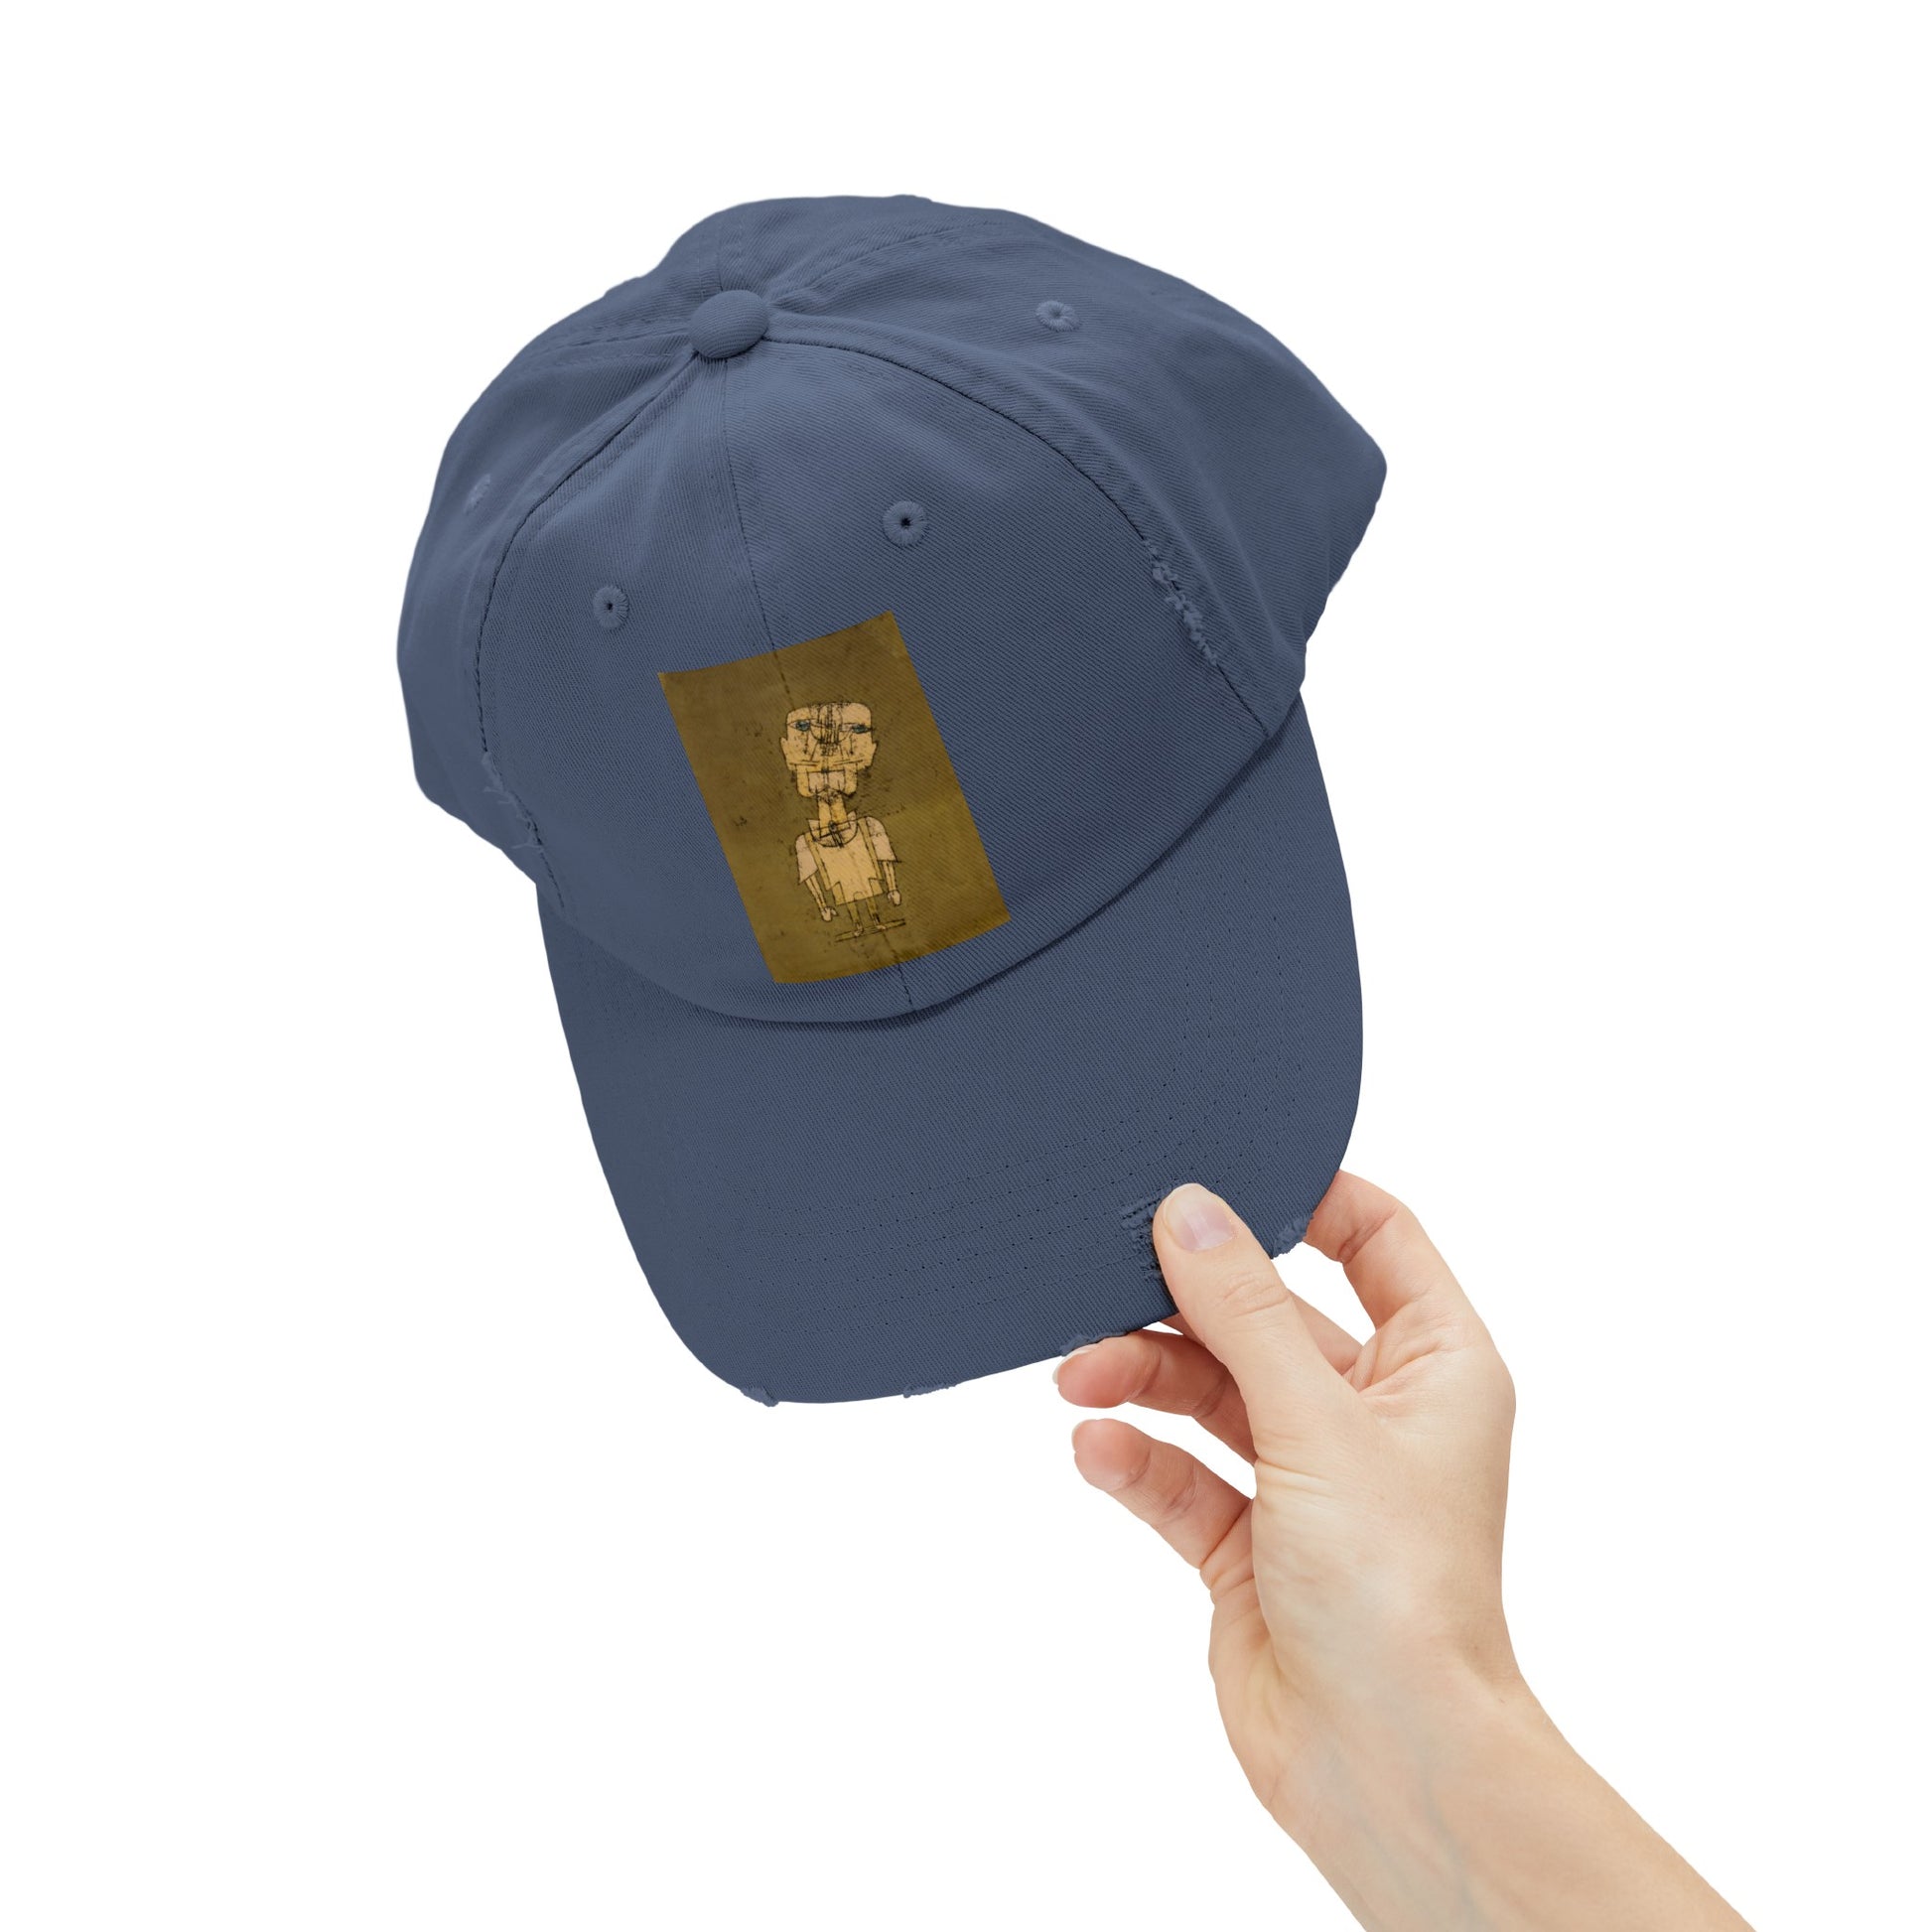 a person holding a baseball cap with a picture of a dog on it